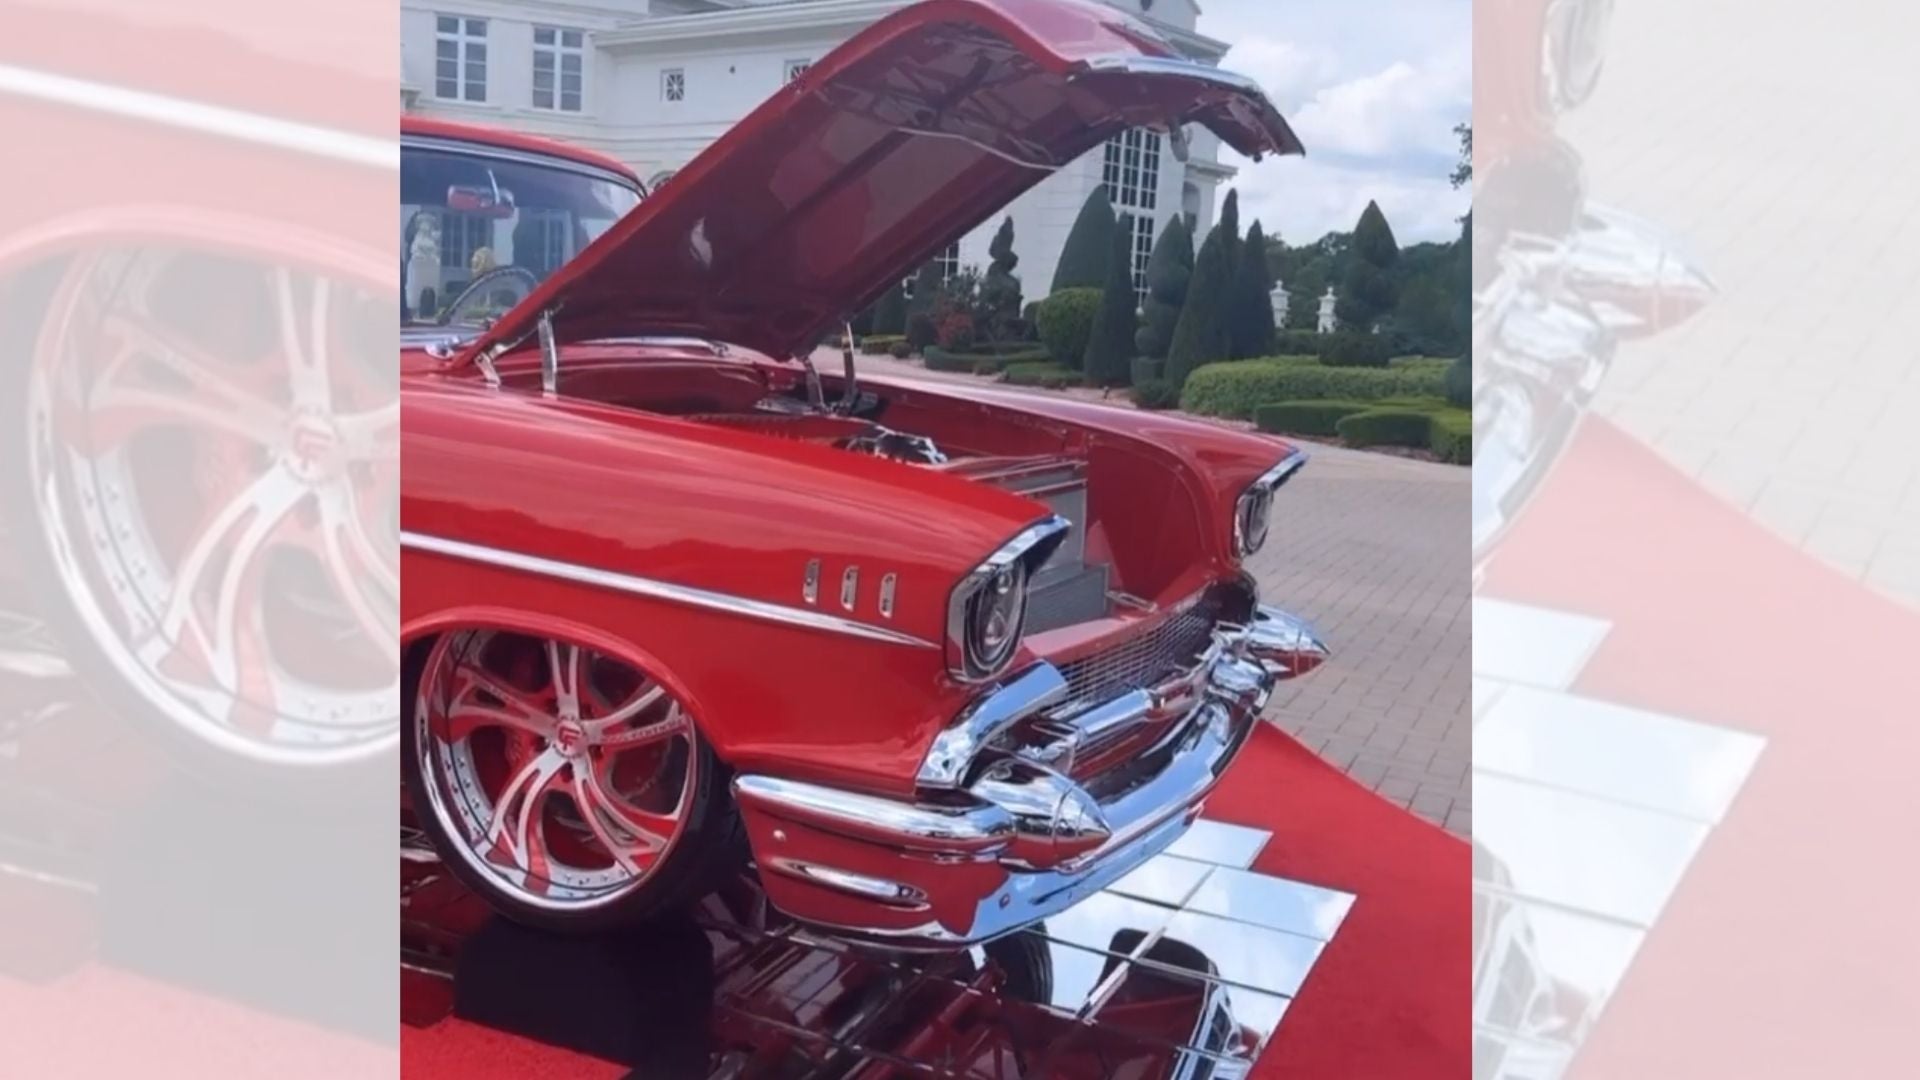 Rick Ross Is Hosting a Car Show at His House This Weekend